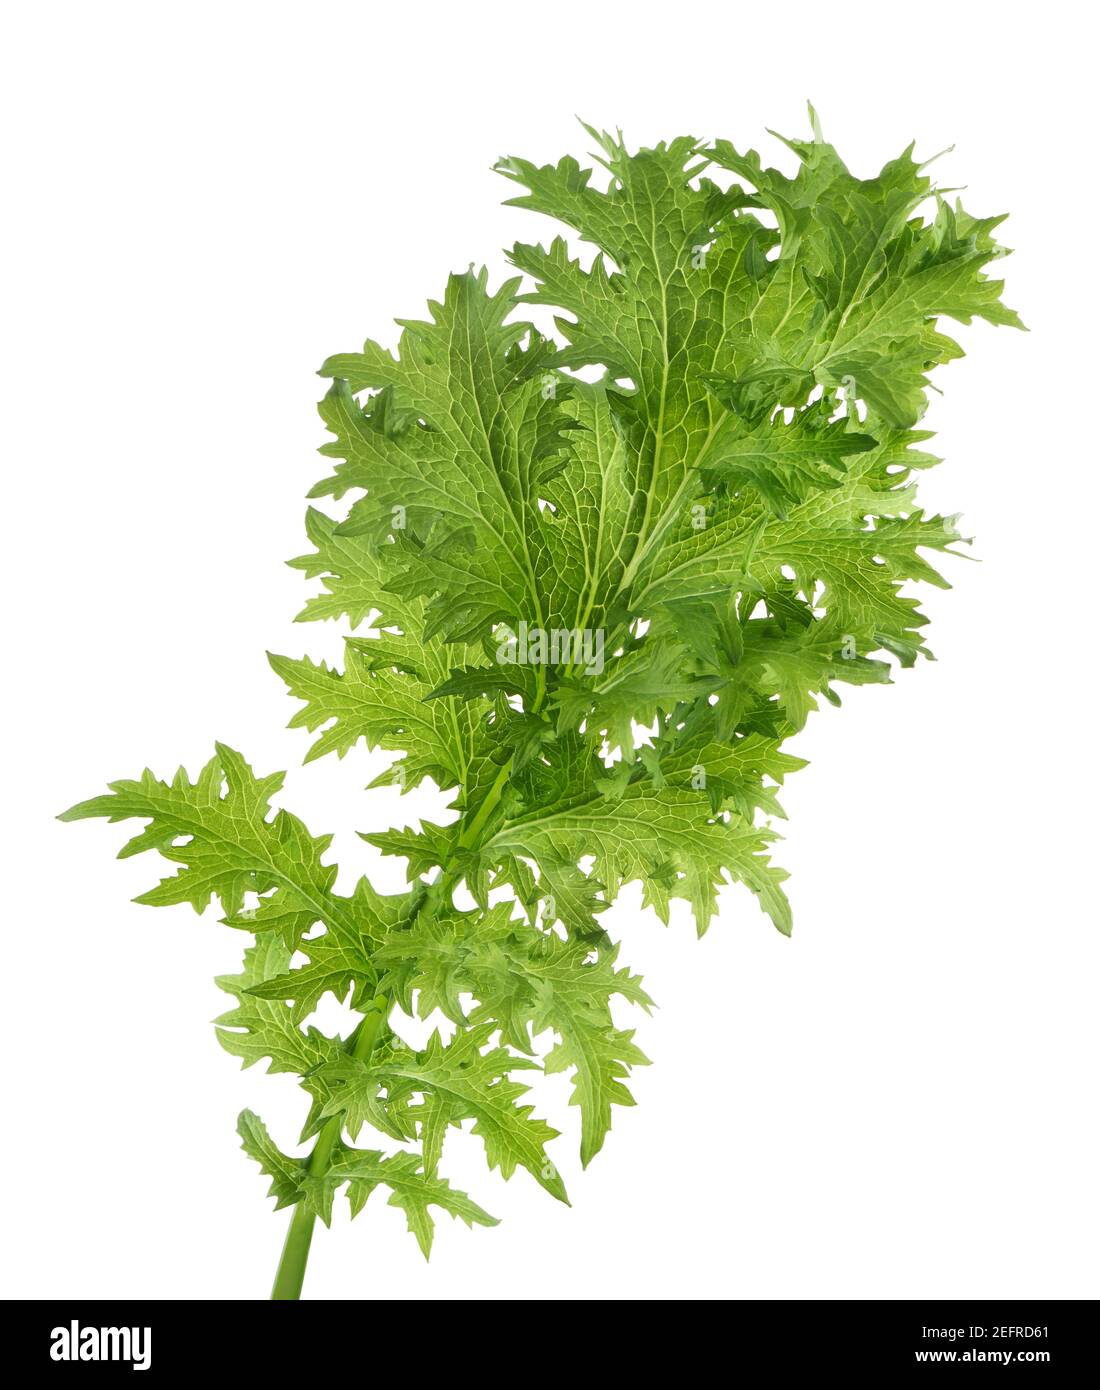 Green Mizuna leaf, organically grown Japanese Wasabi mustard variety, bitter pungent edible leafy green. Closeup isolated on white studio background. Stock Photo